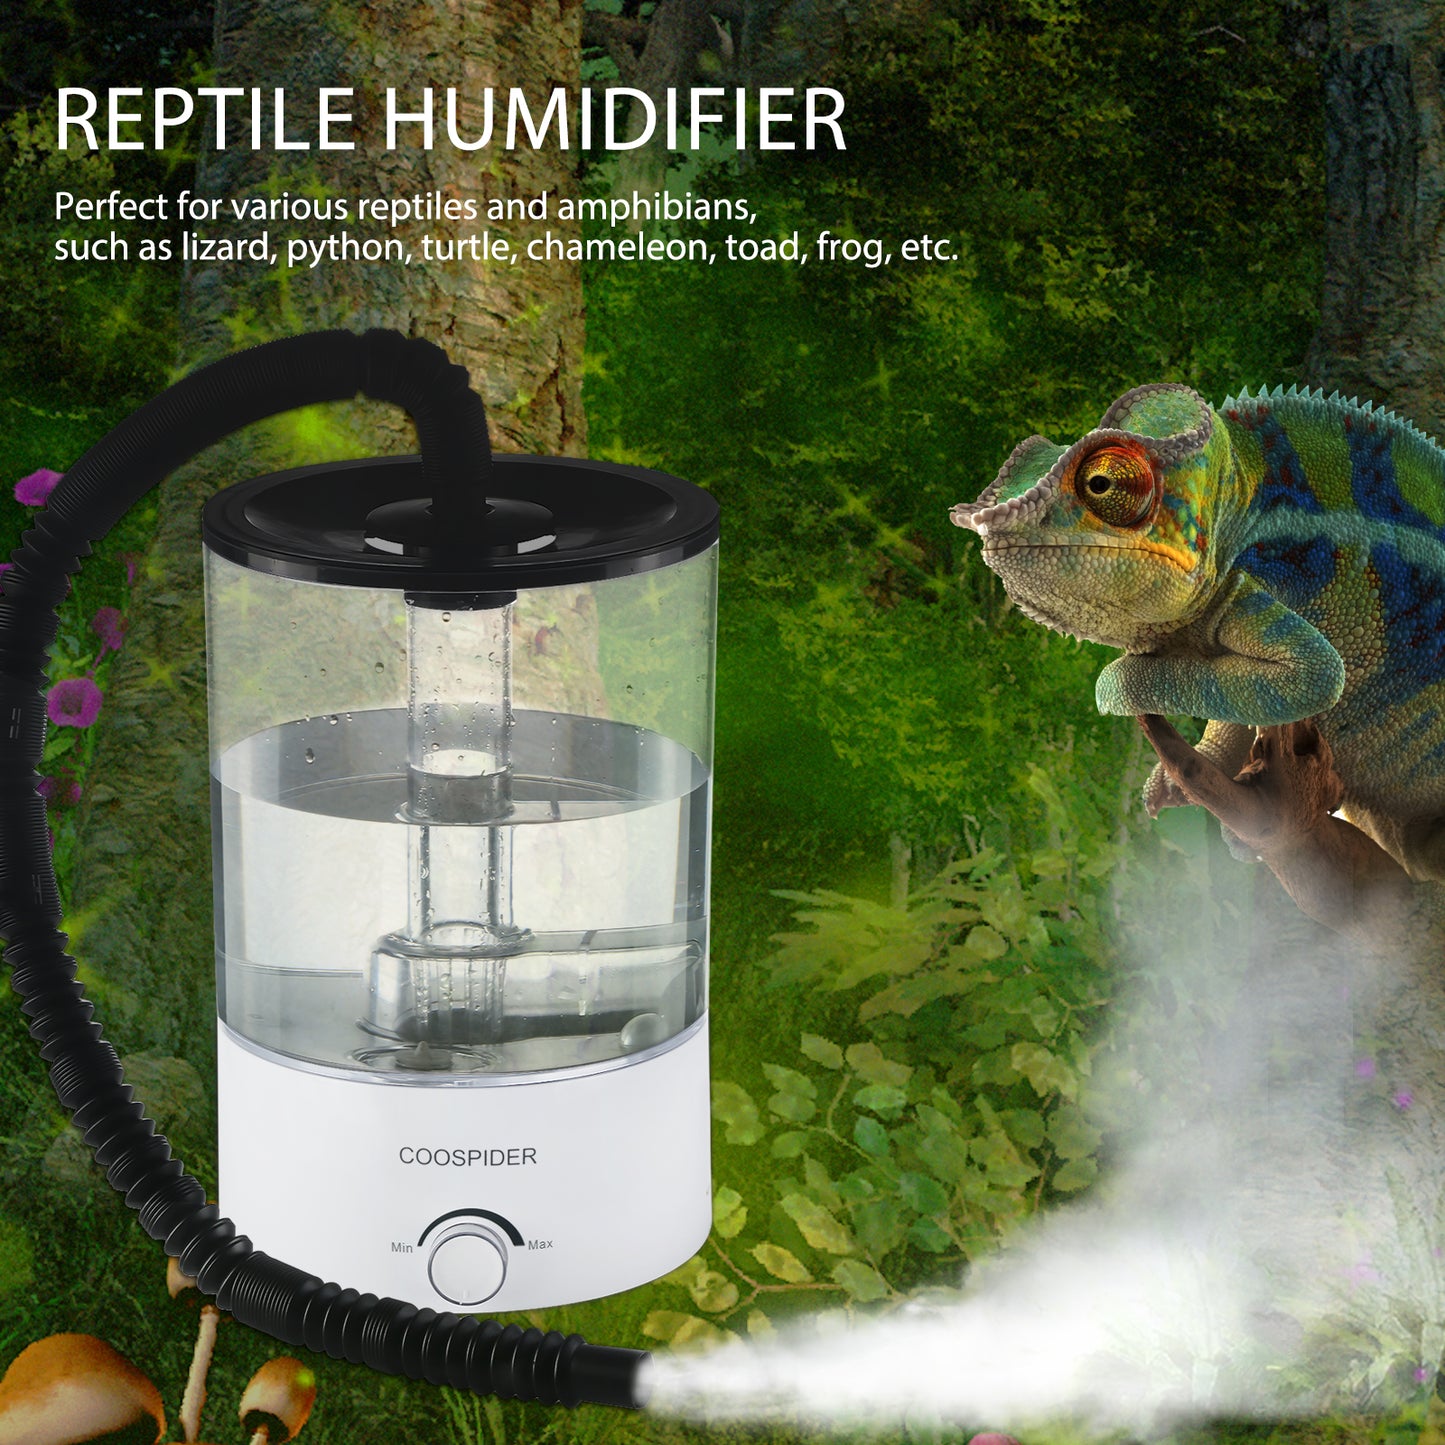 (Only for wholesale orders, the larger the order, the greater the discount) Coospider Top Fill Reptile Fogger Terrariums Humidifier Fog Machine Mister 4.2L Large Size Perfect for Various Reptiles/Amphibians/Herps/Paludarium/Vivarium